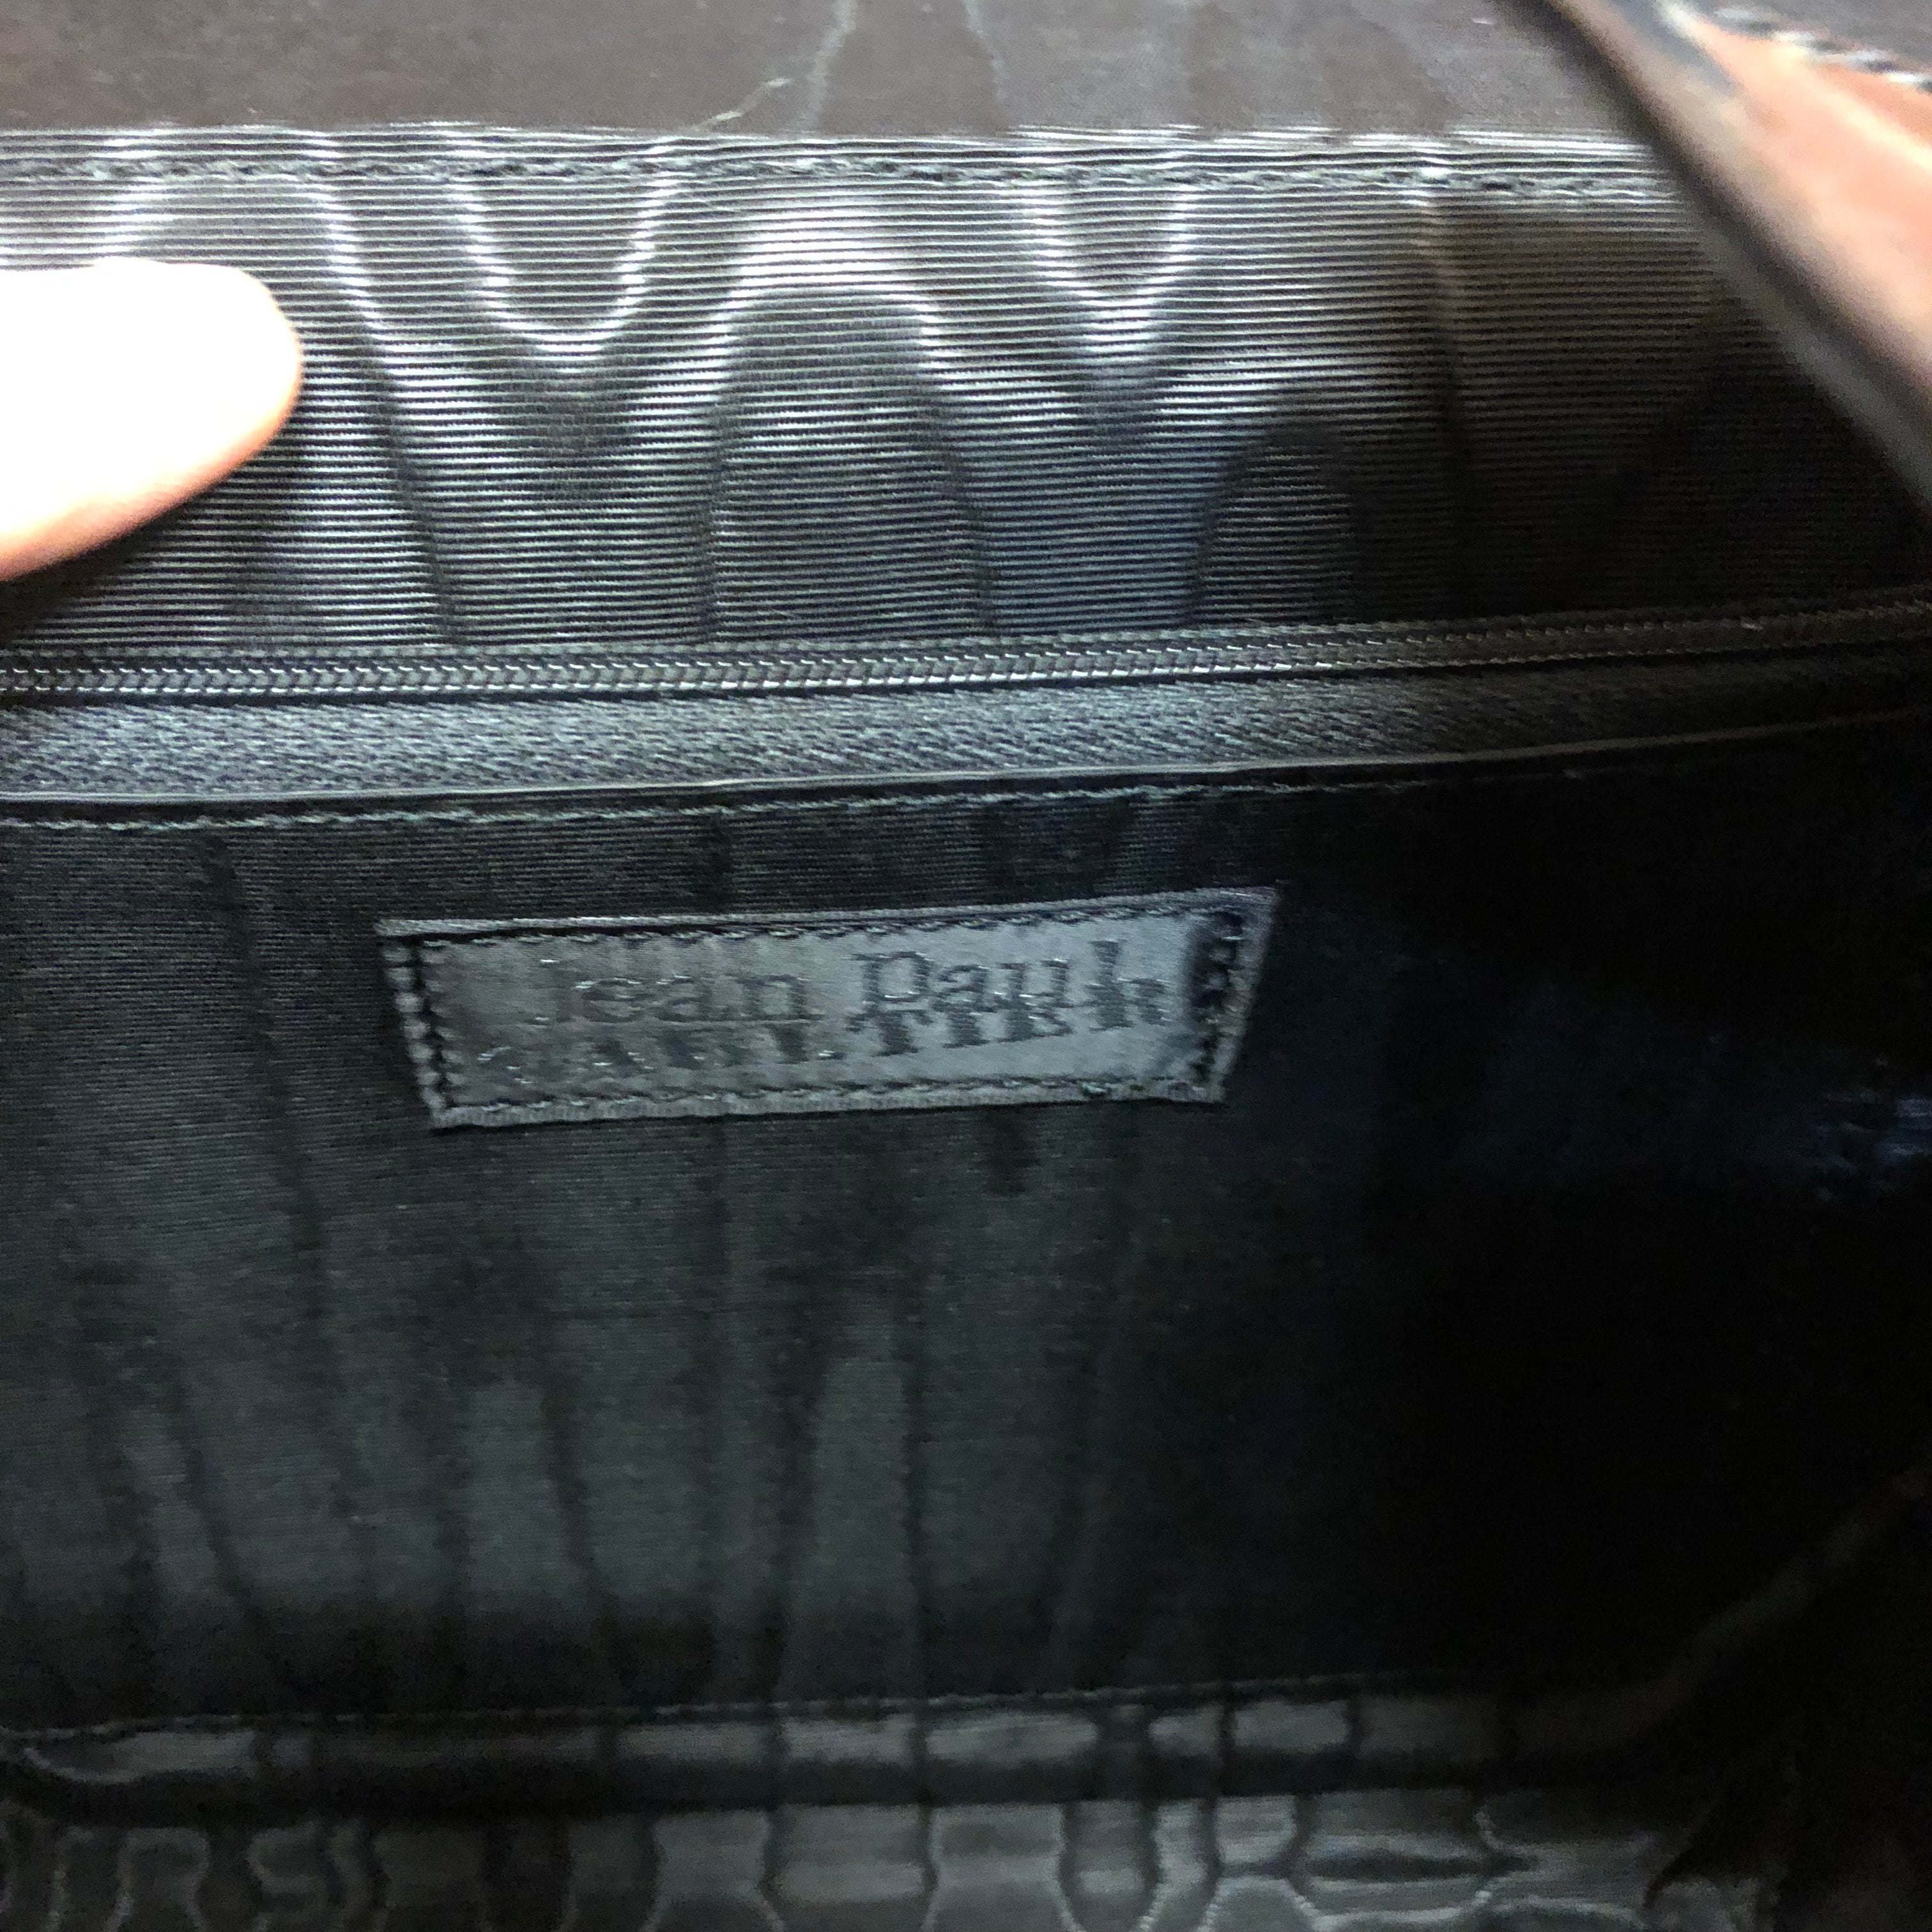 JEAN PAUL GAULTIER pony hair and patent leather box bag!